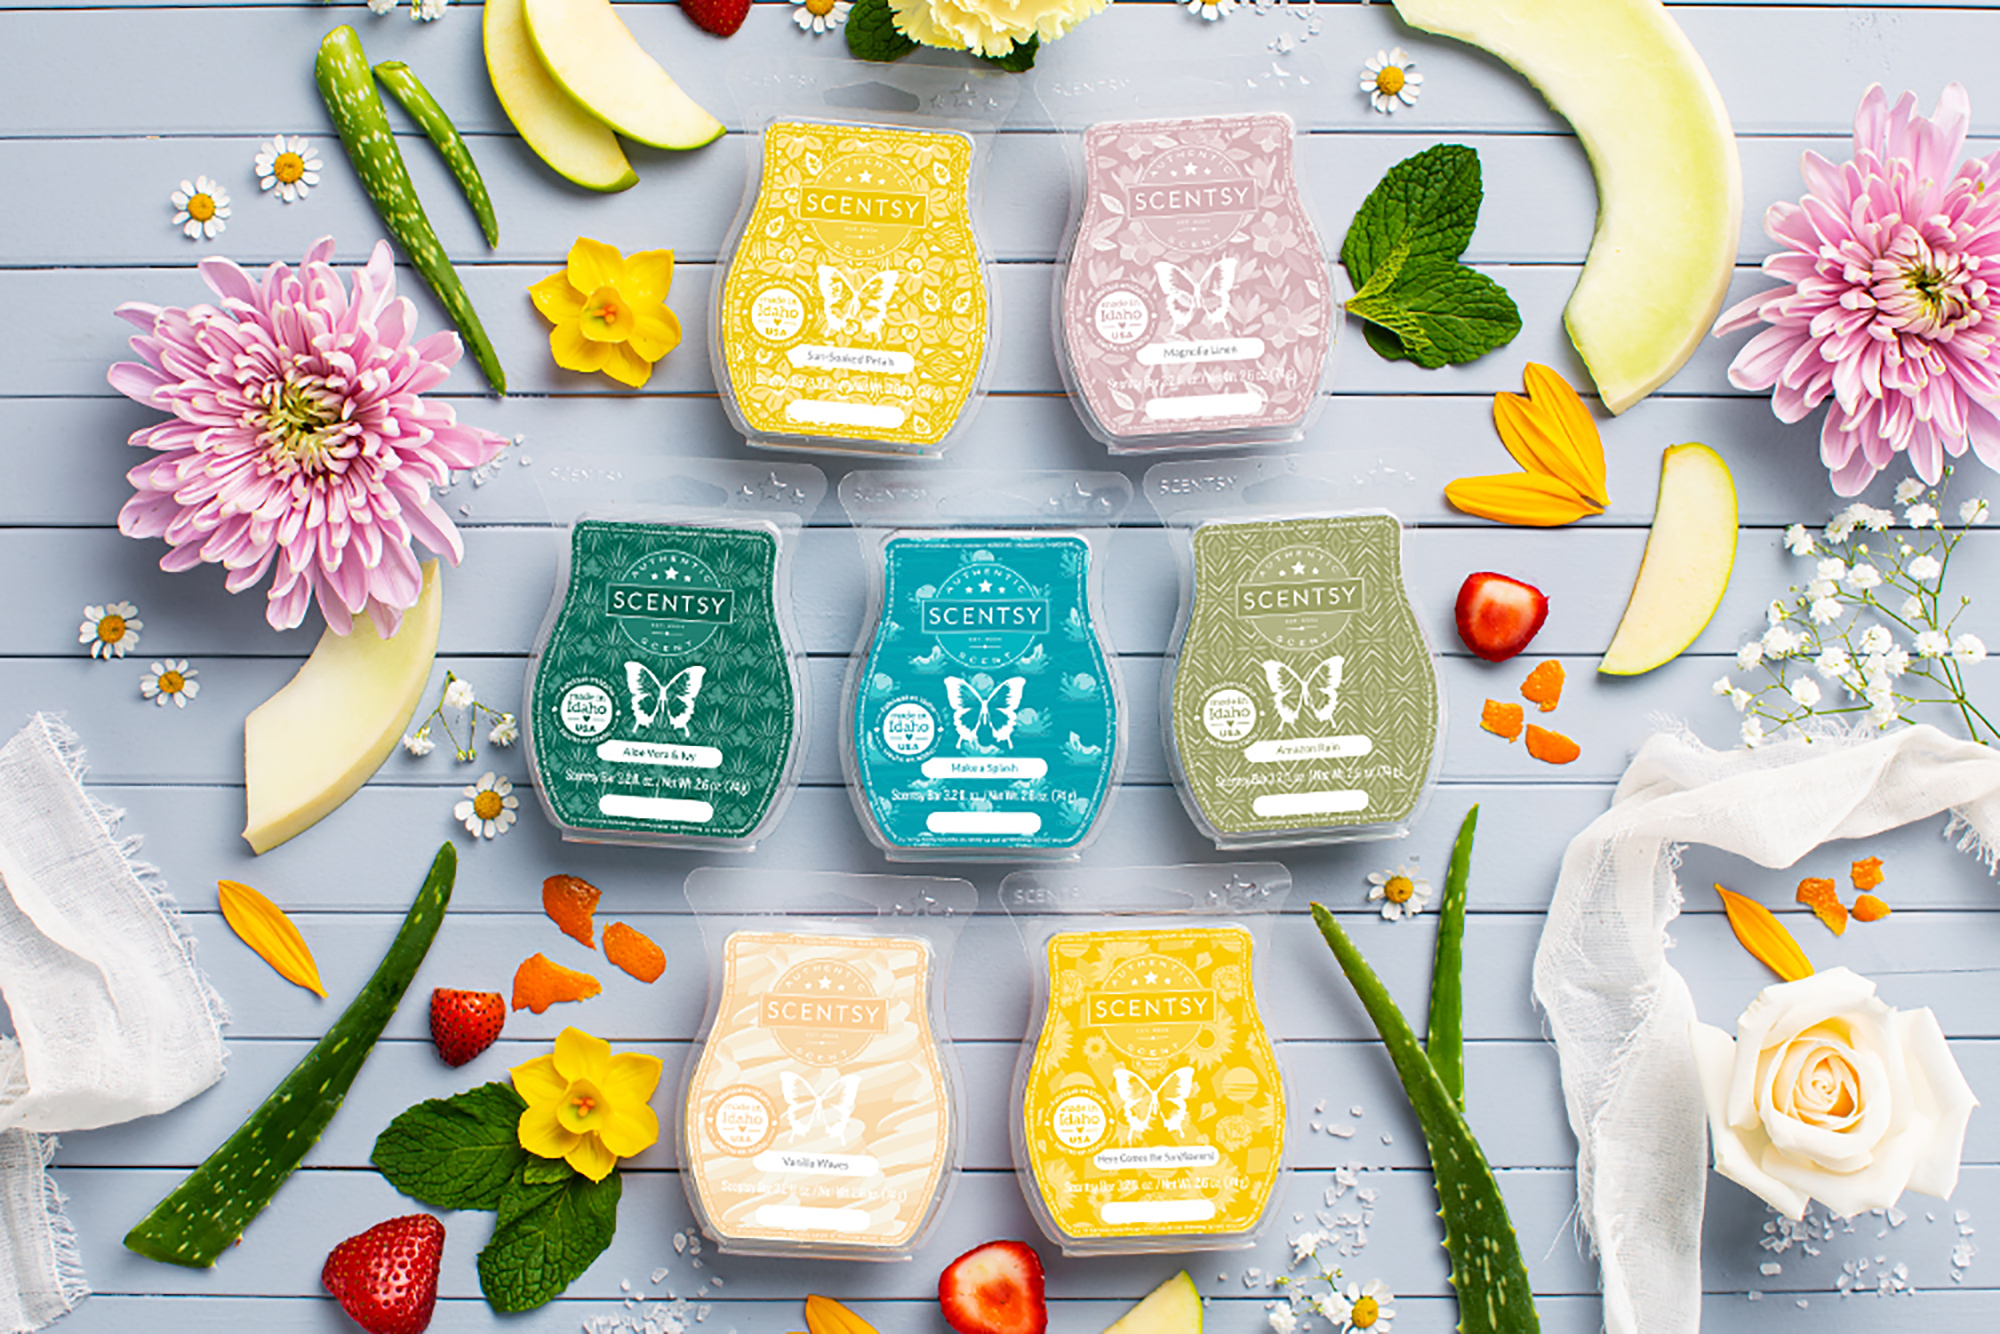 Scentsy celebrates International Fragrance Day with an image of various new Spring 2021 clamshells